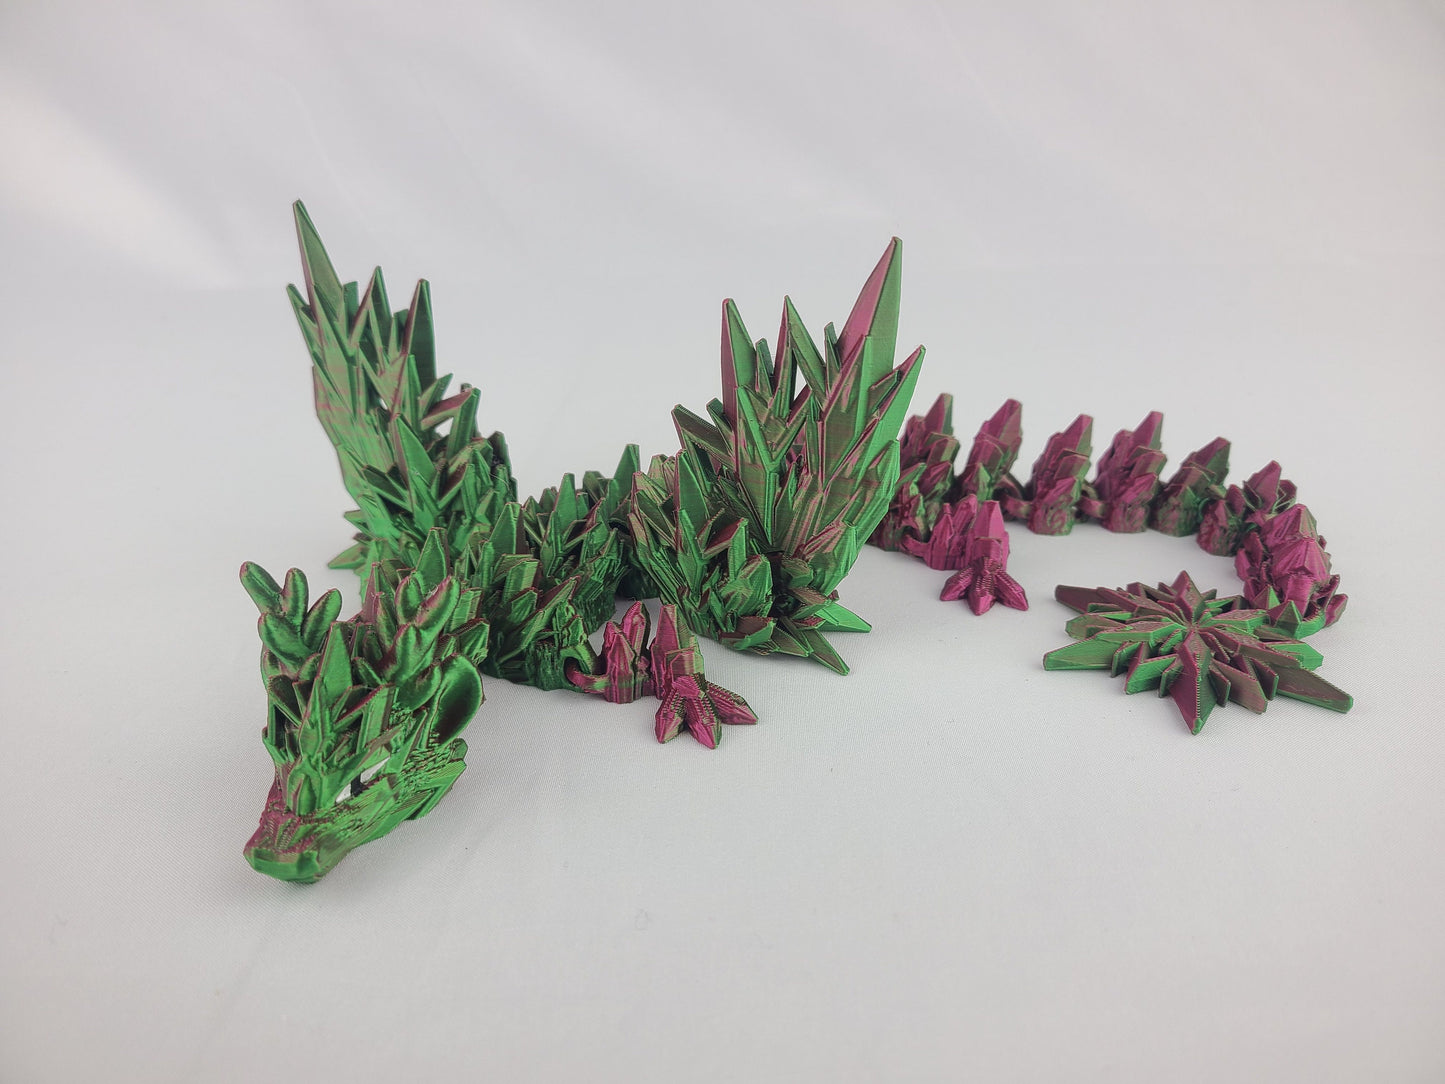 Winged Winter Dragon Articulated and 3d printed - Multicolor and free US shipping!